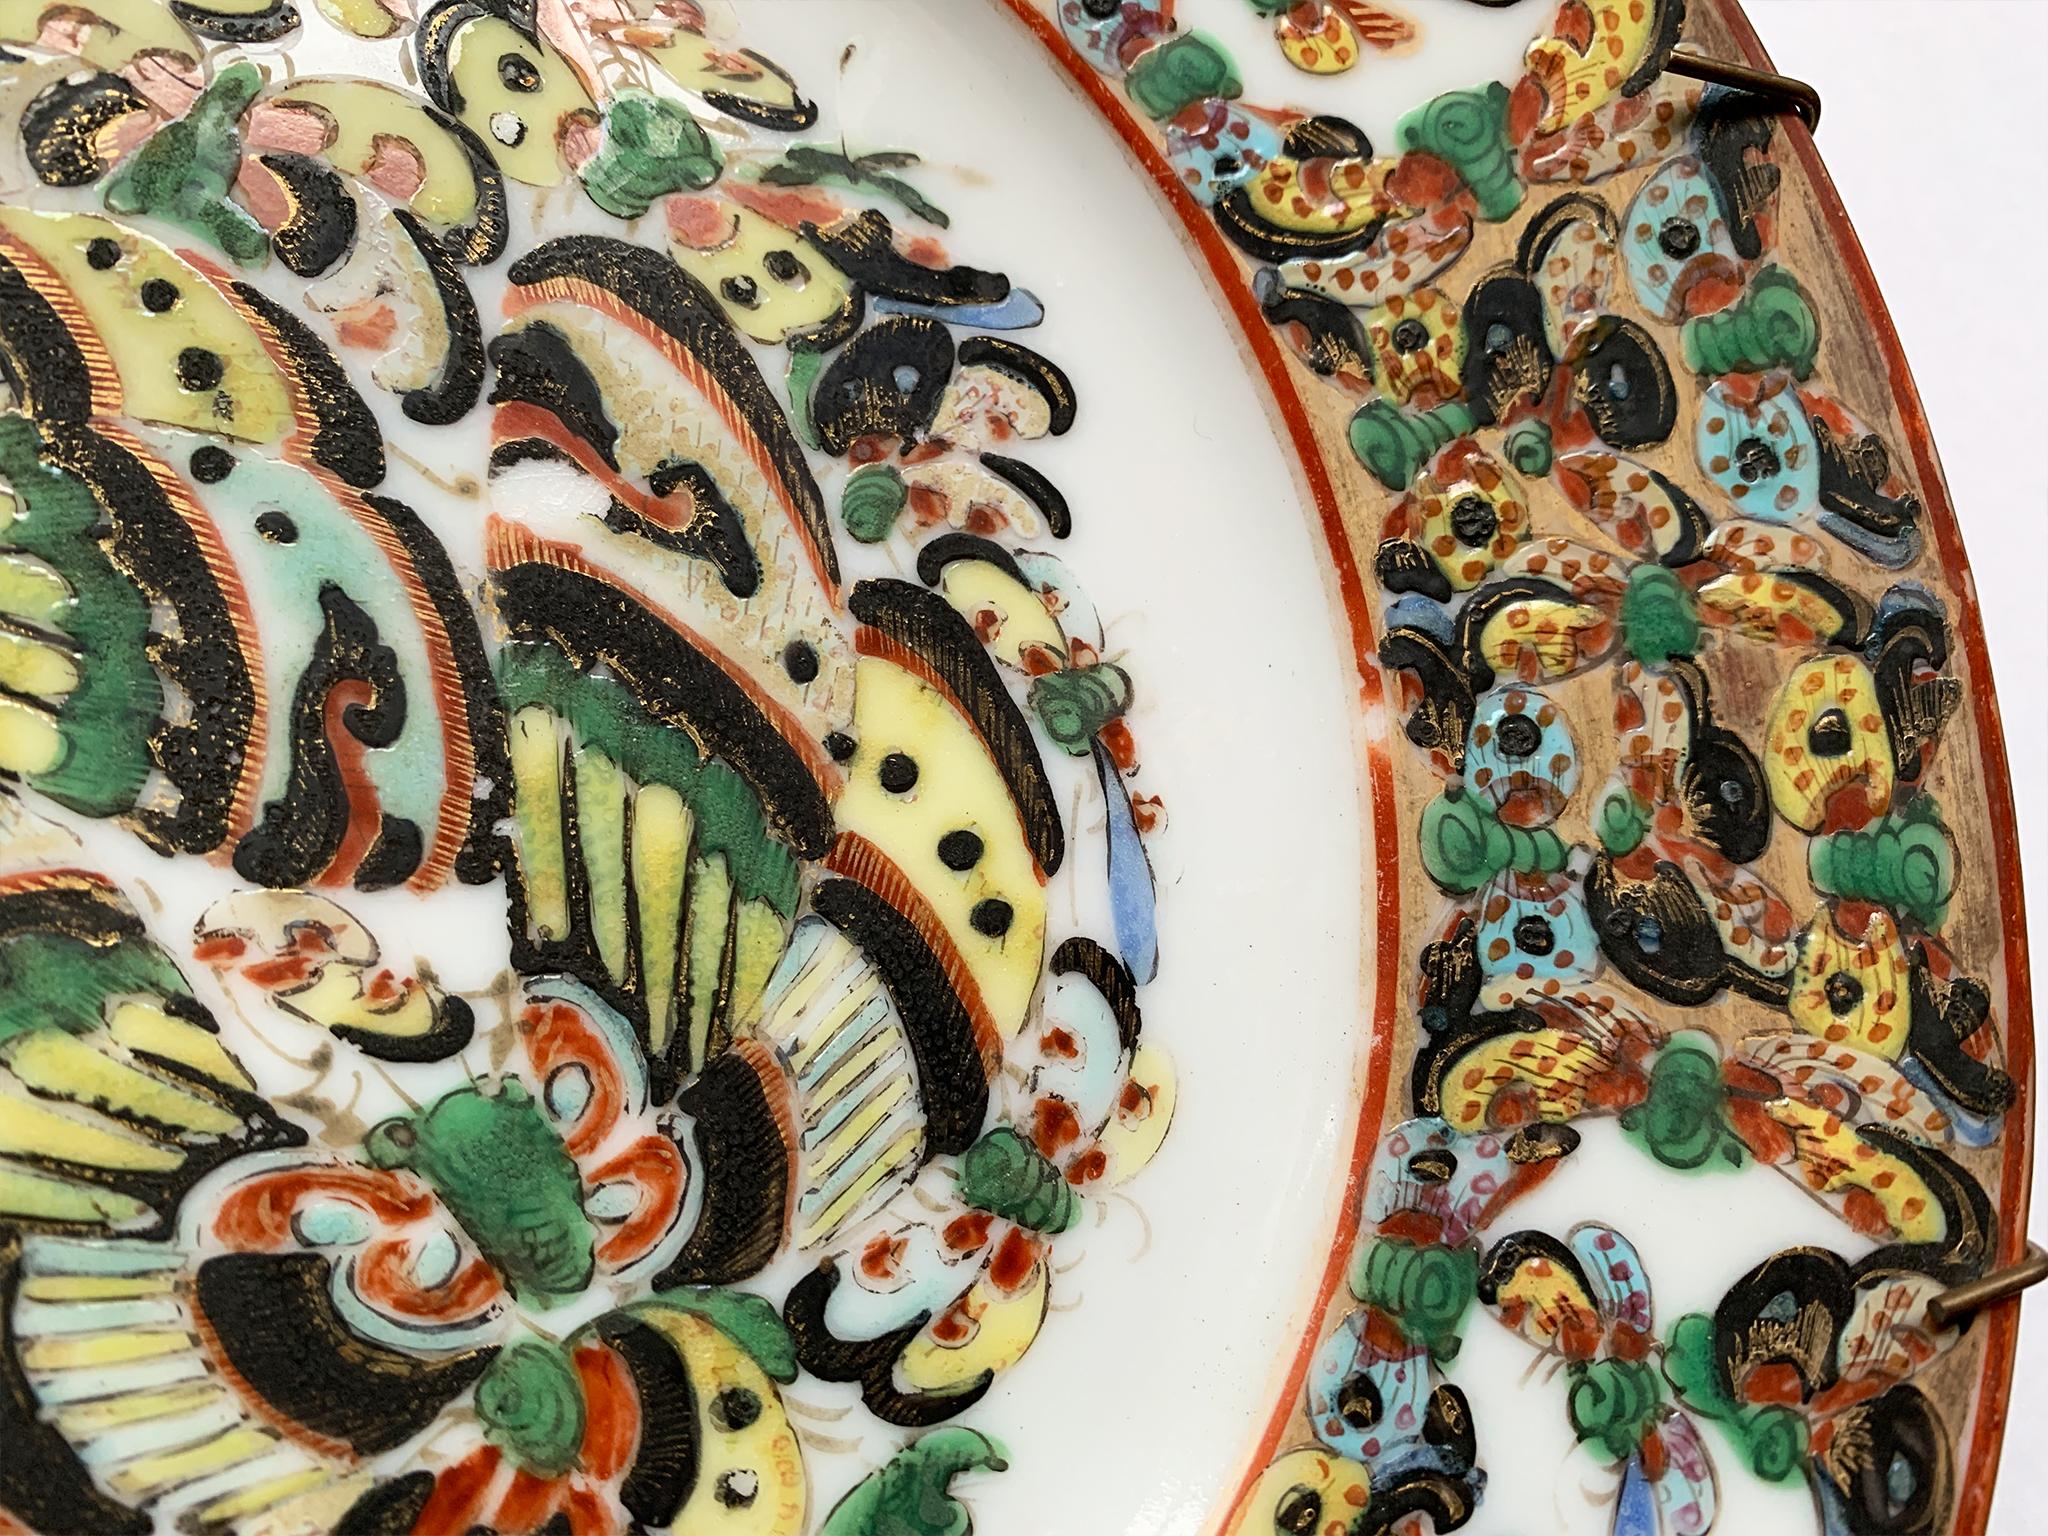 20th Century Chinese Decorative Plates, a Set of 6 4